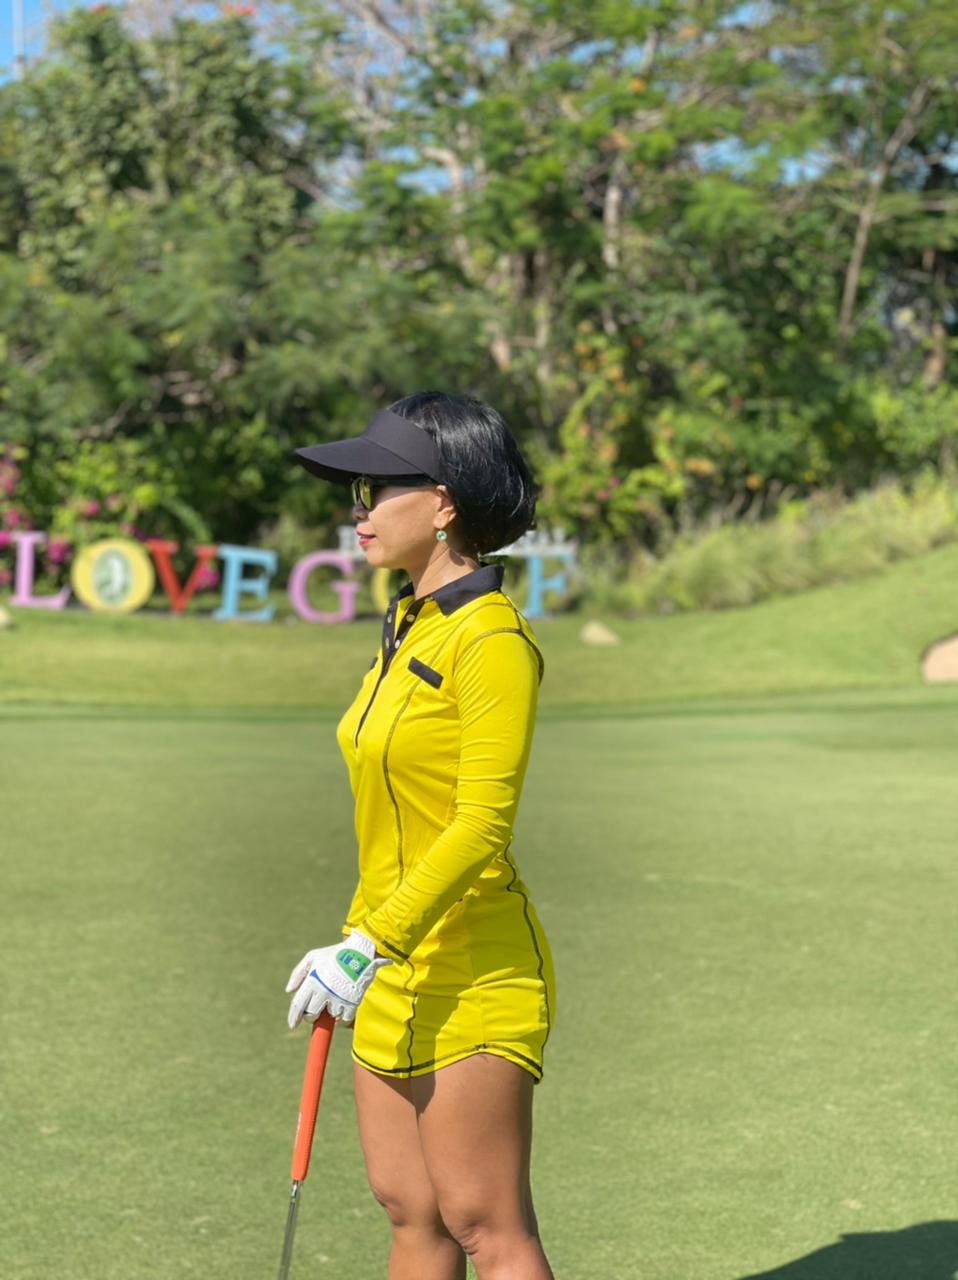 GD-012B || Golf Dress Bright Yellow with Black Trim and Black Overlocked Seams  LS  Mock Breast Pocket Trims with 2 Waist Pockets